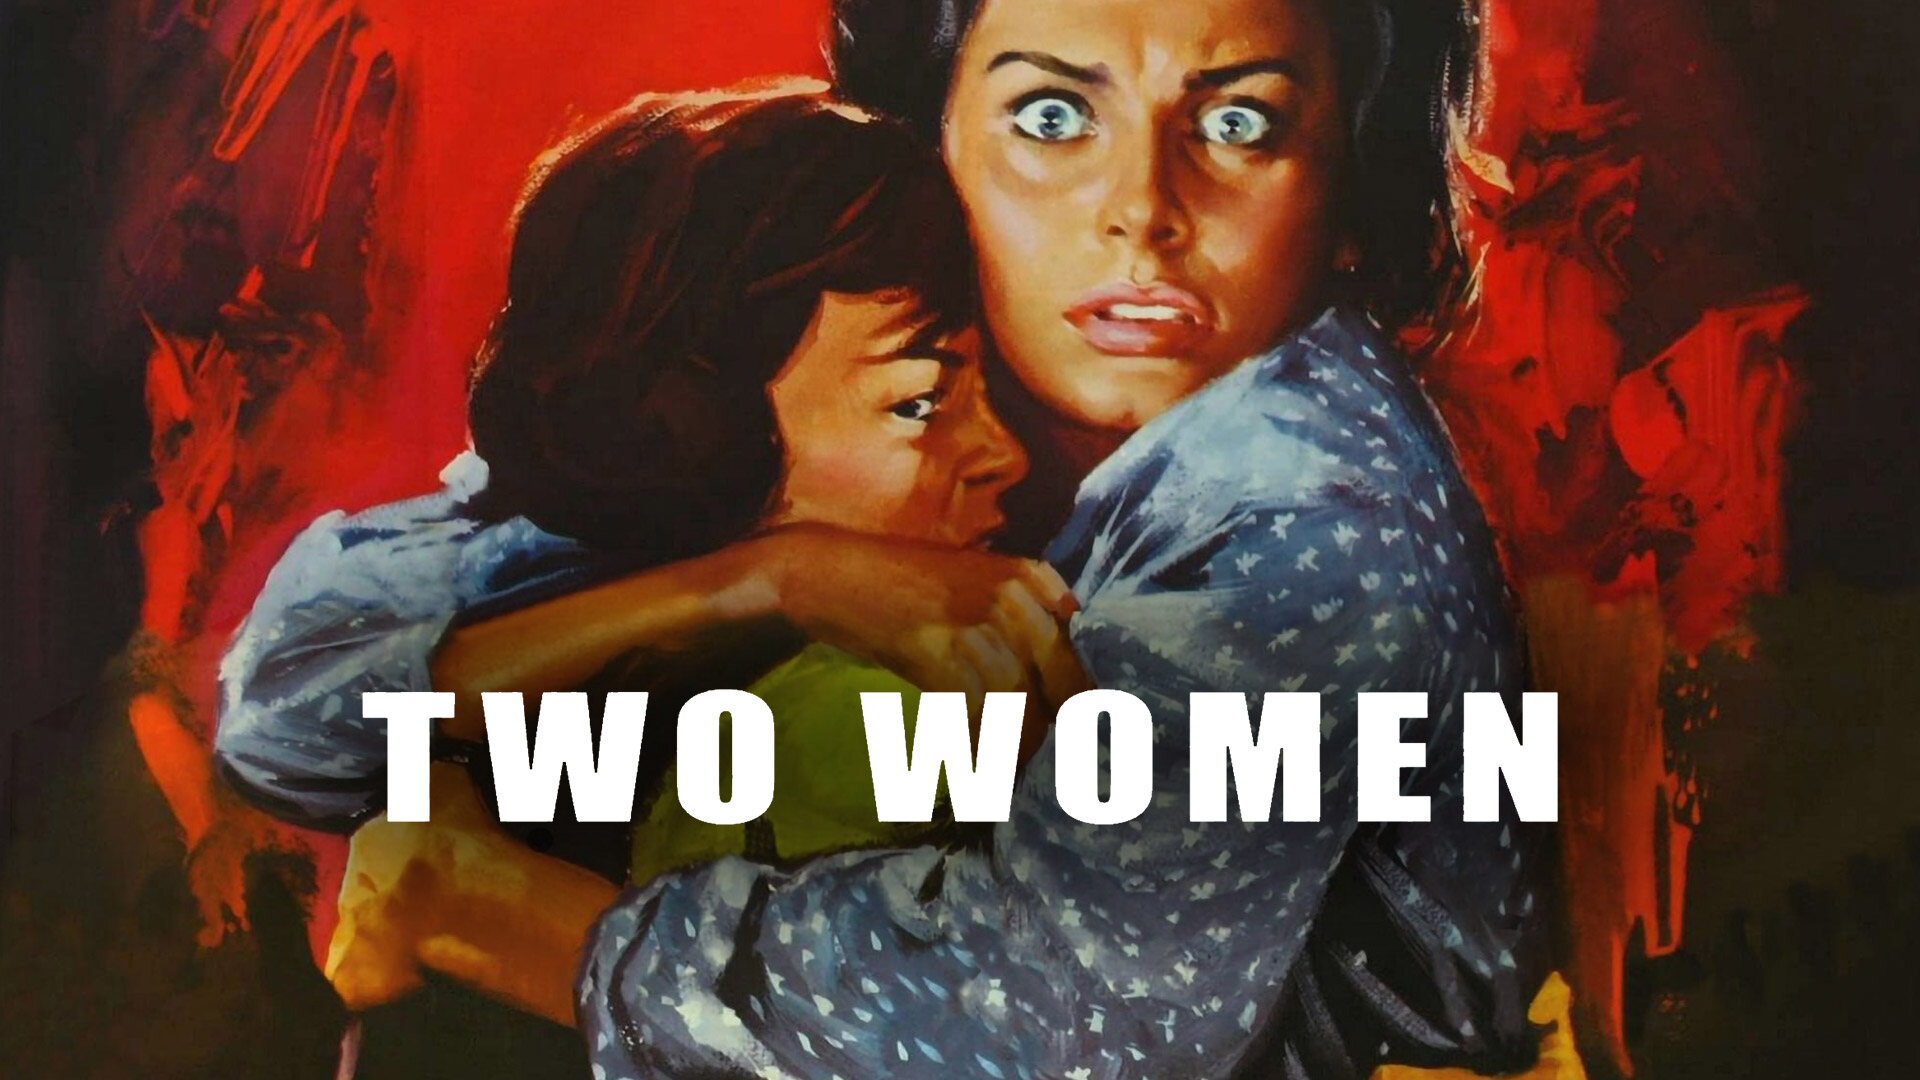 50 Facts about the movie Two Women - Facts.net